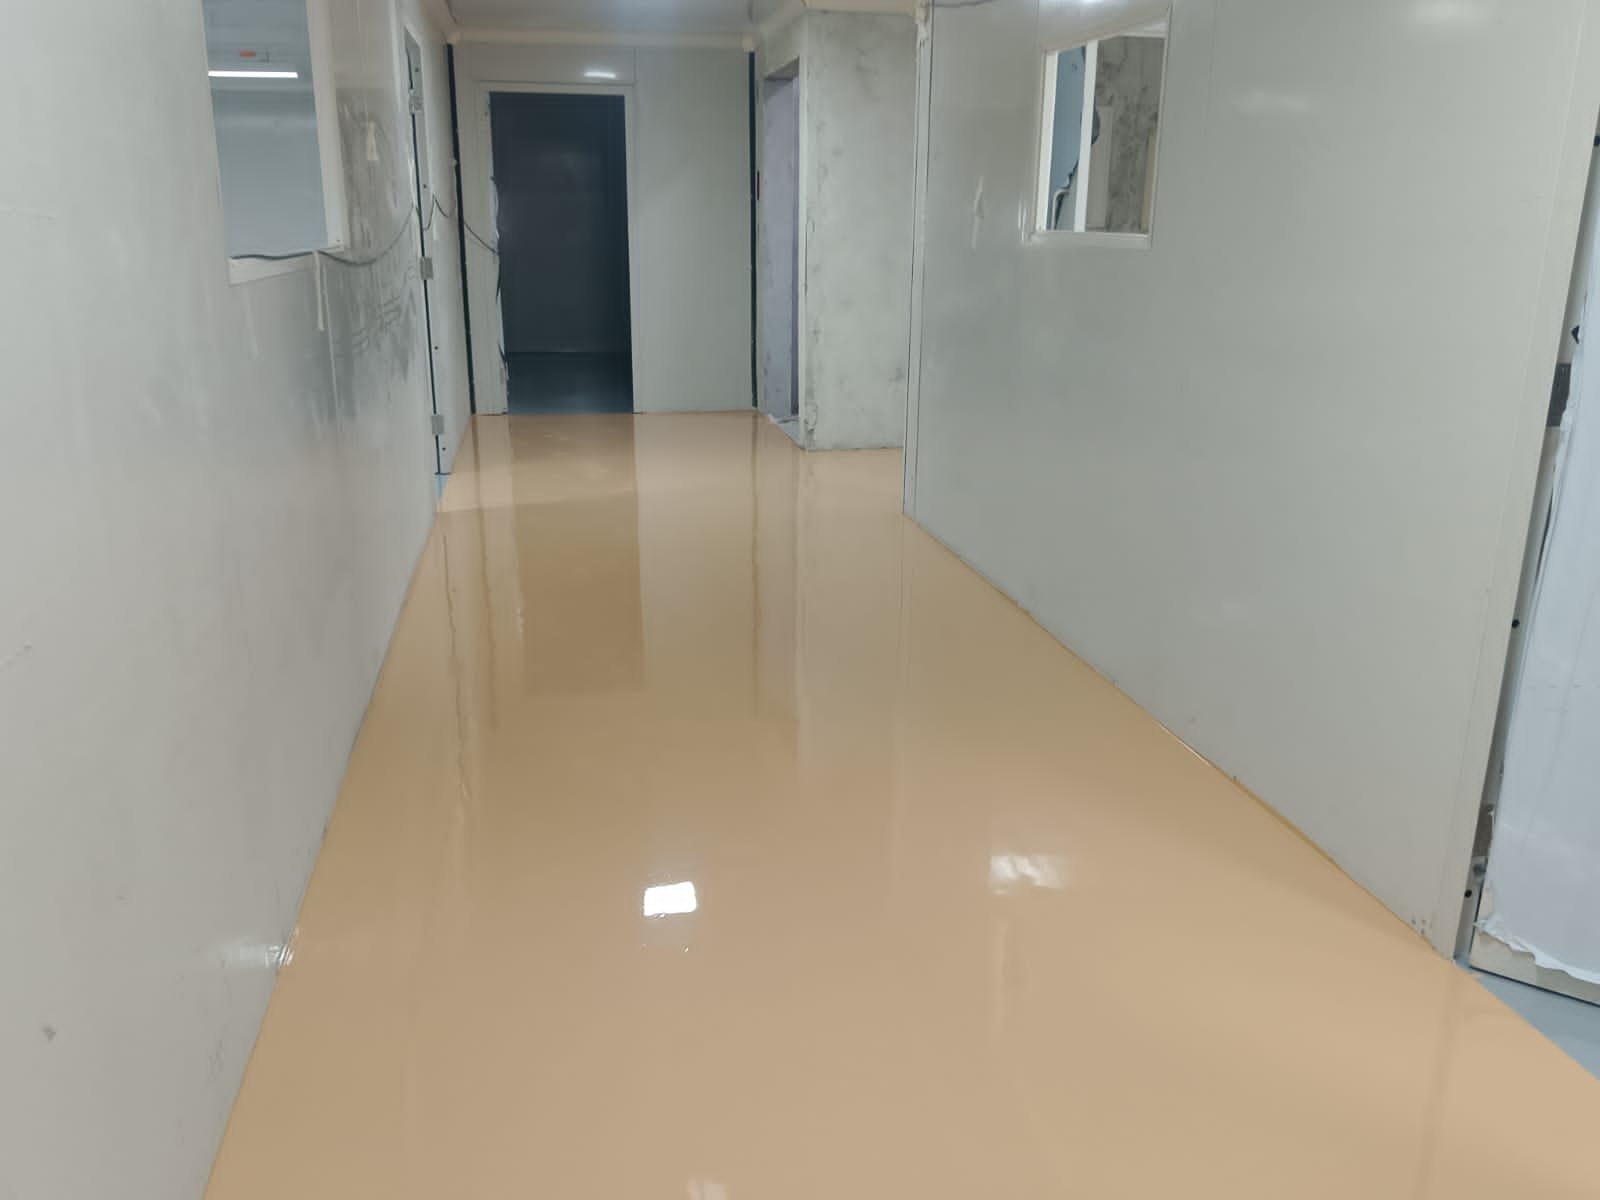 IMPORTANCE OF EPOXY FLOORING IN MEAT INDUSTRY